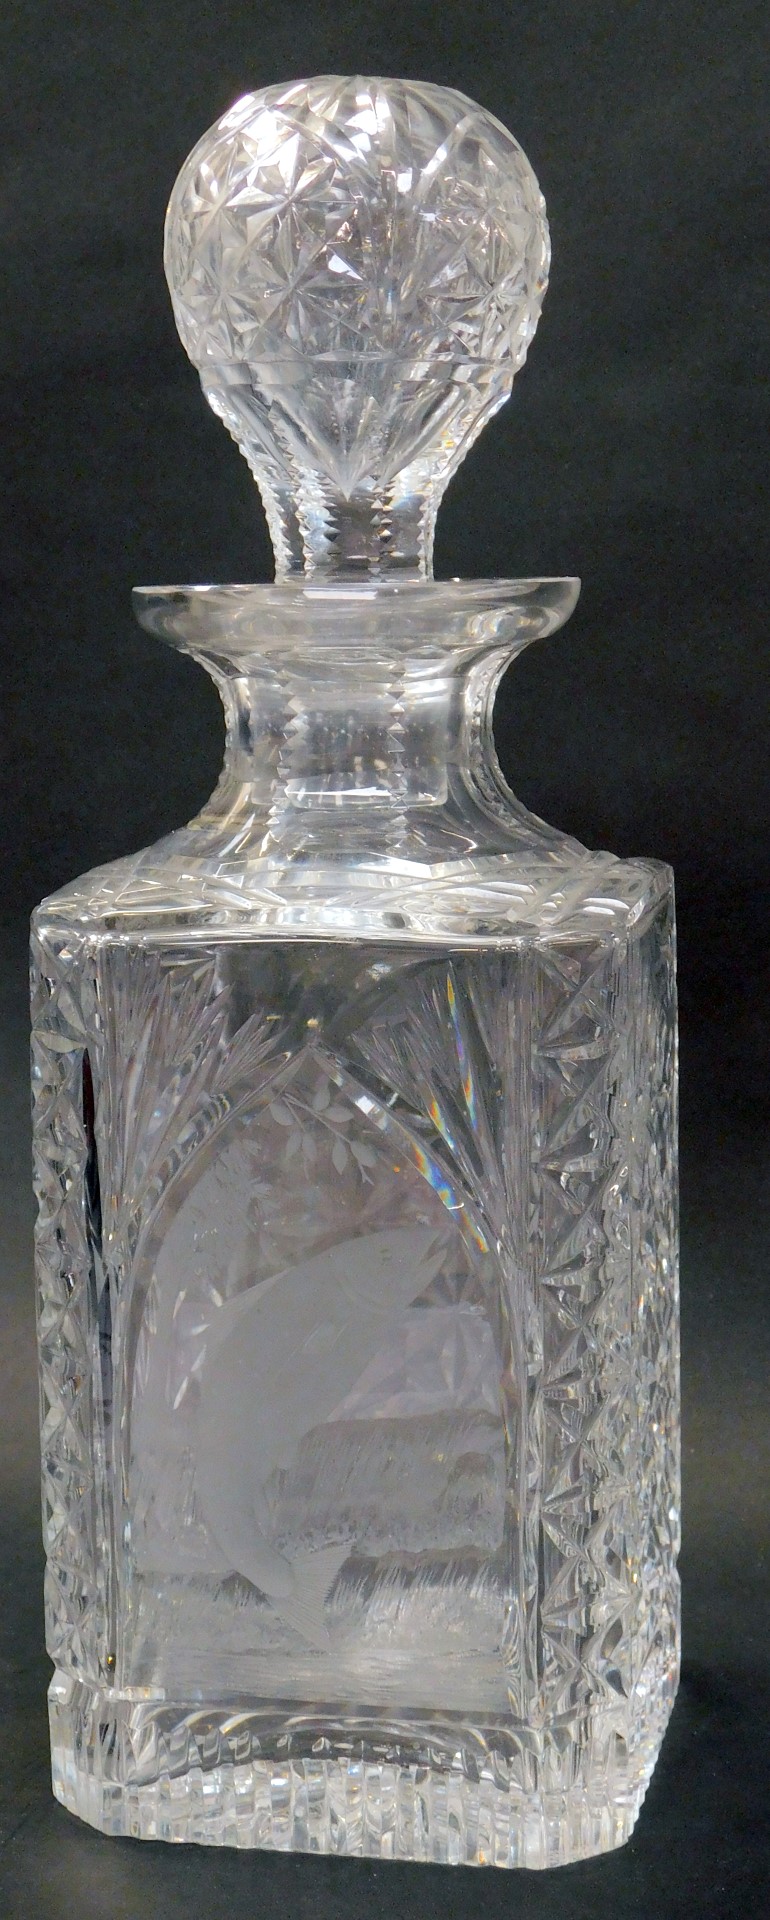 An Edinburgh crystal magnum sized cut glass spirit decanter from the Caledonia Collection, engraved